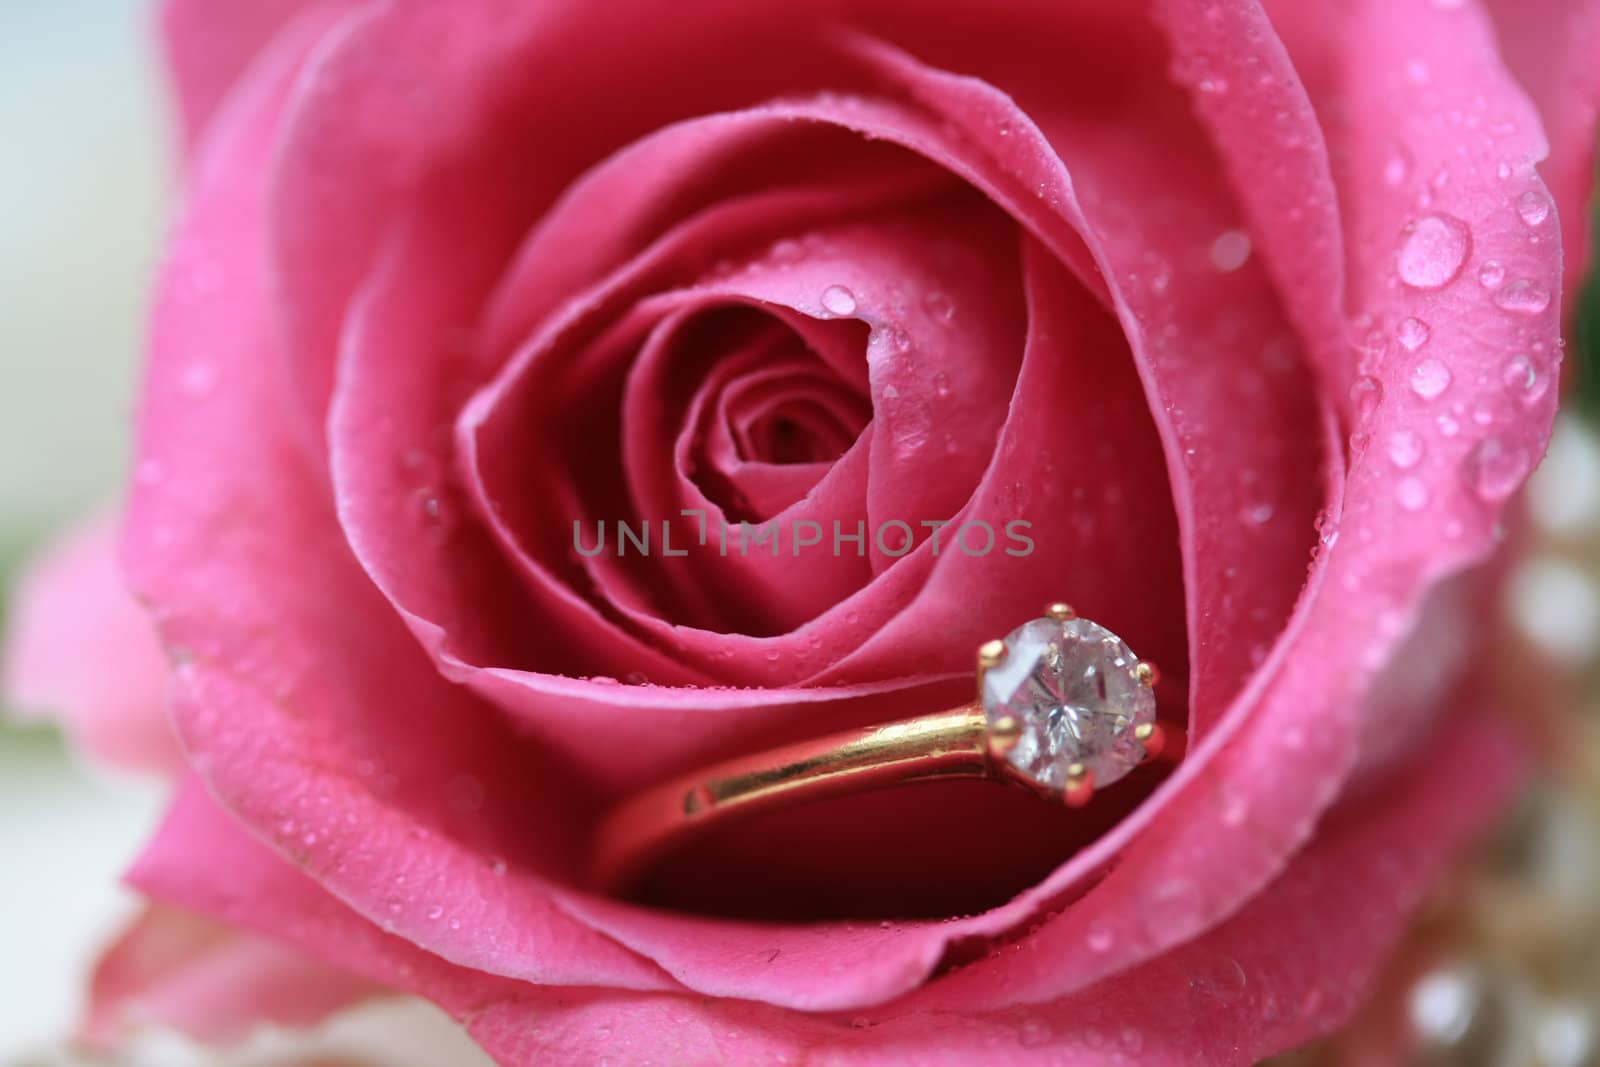 Diamond engagement ring in a wet rose by studioportosabbia